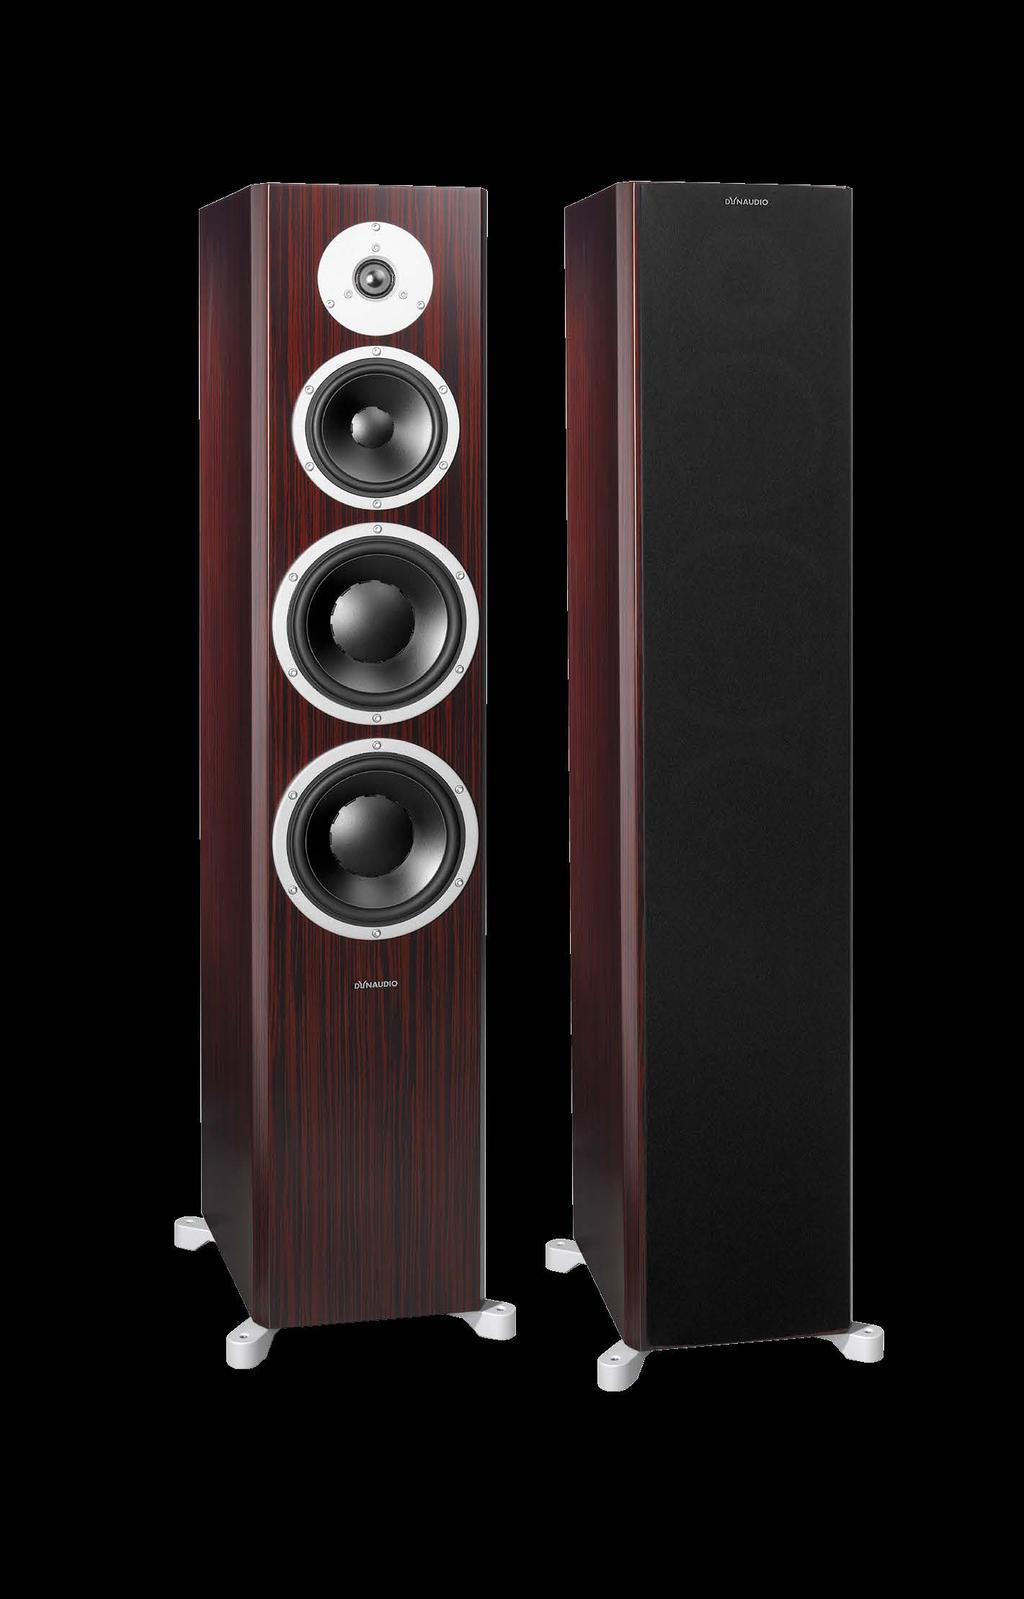 The midrange driver also utilizes MSP, thus ensuring a seamless integration with the woofers, while the tweeter s coated fabric dome guarantees the finest resolution